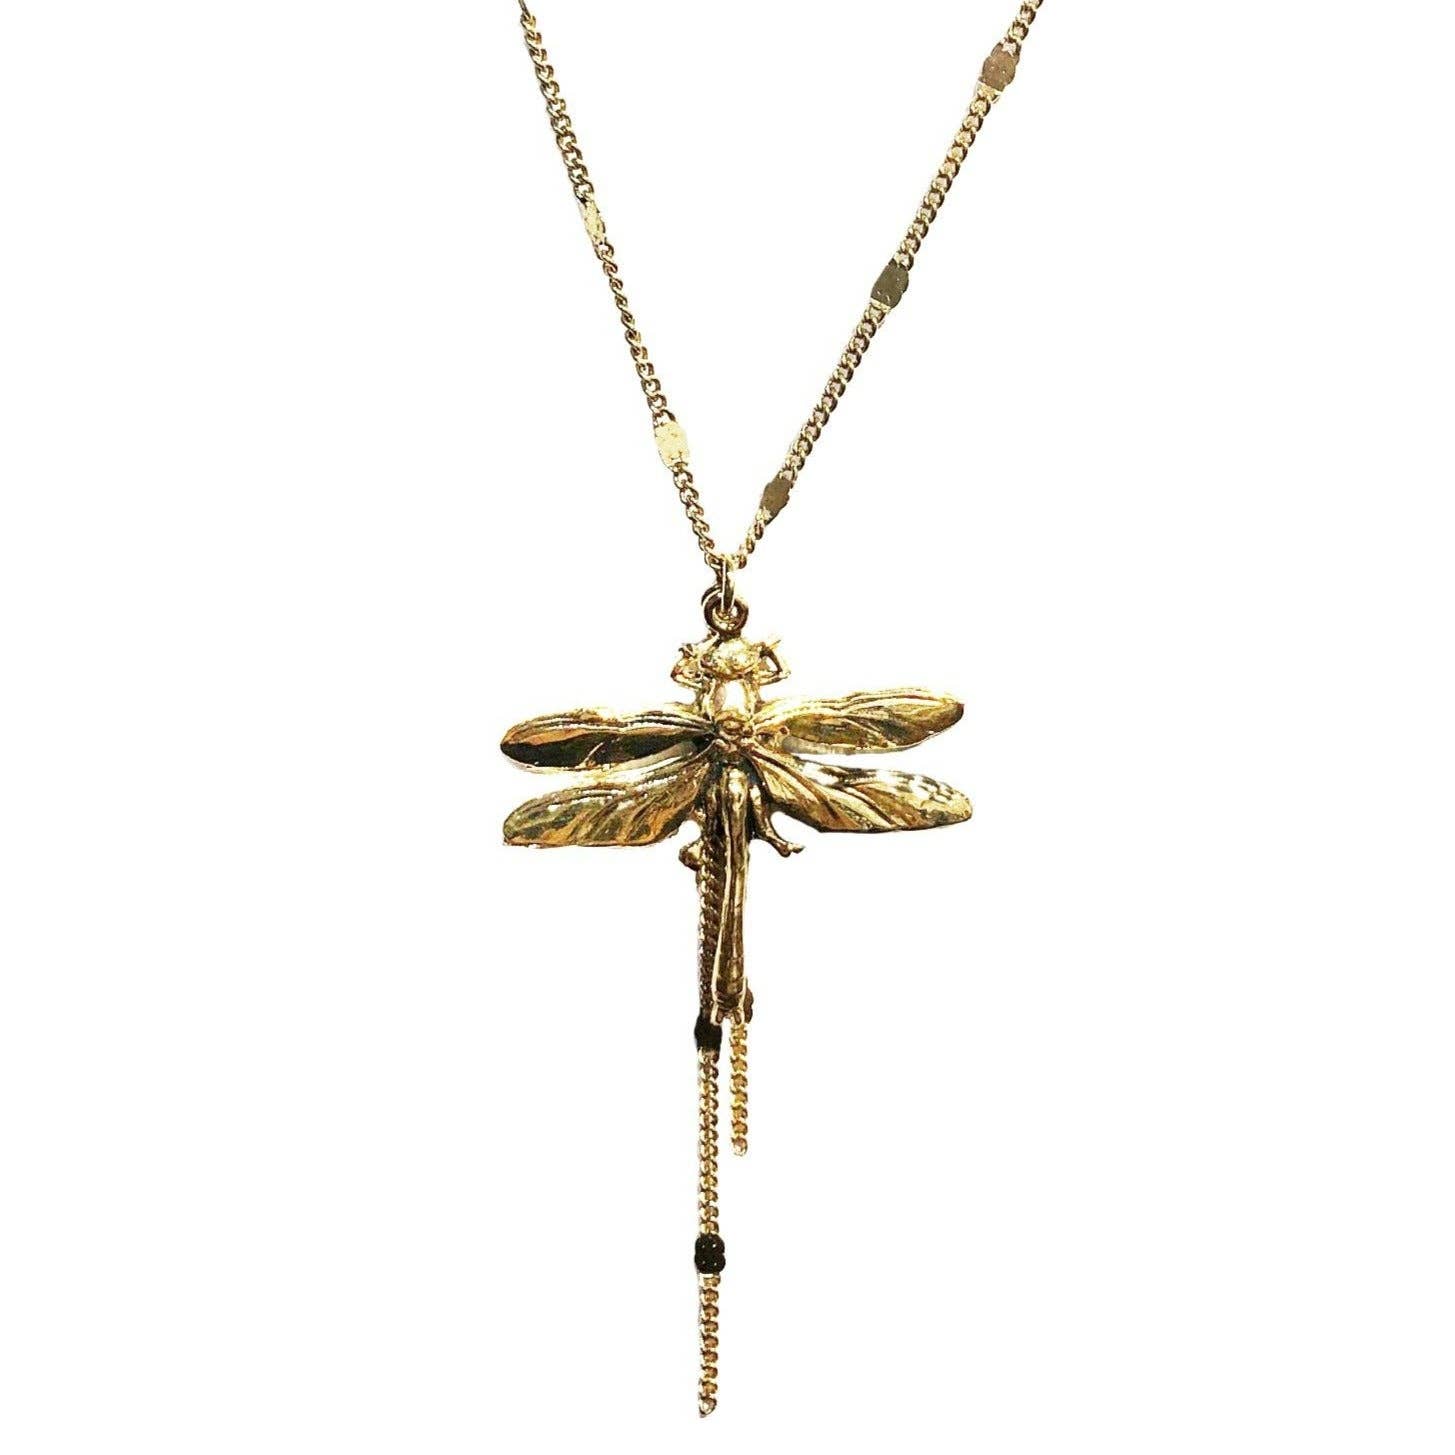 Little Golden Dragonfly Necklace